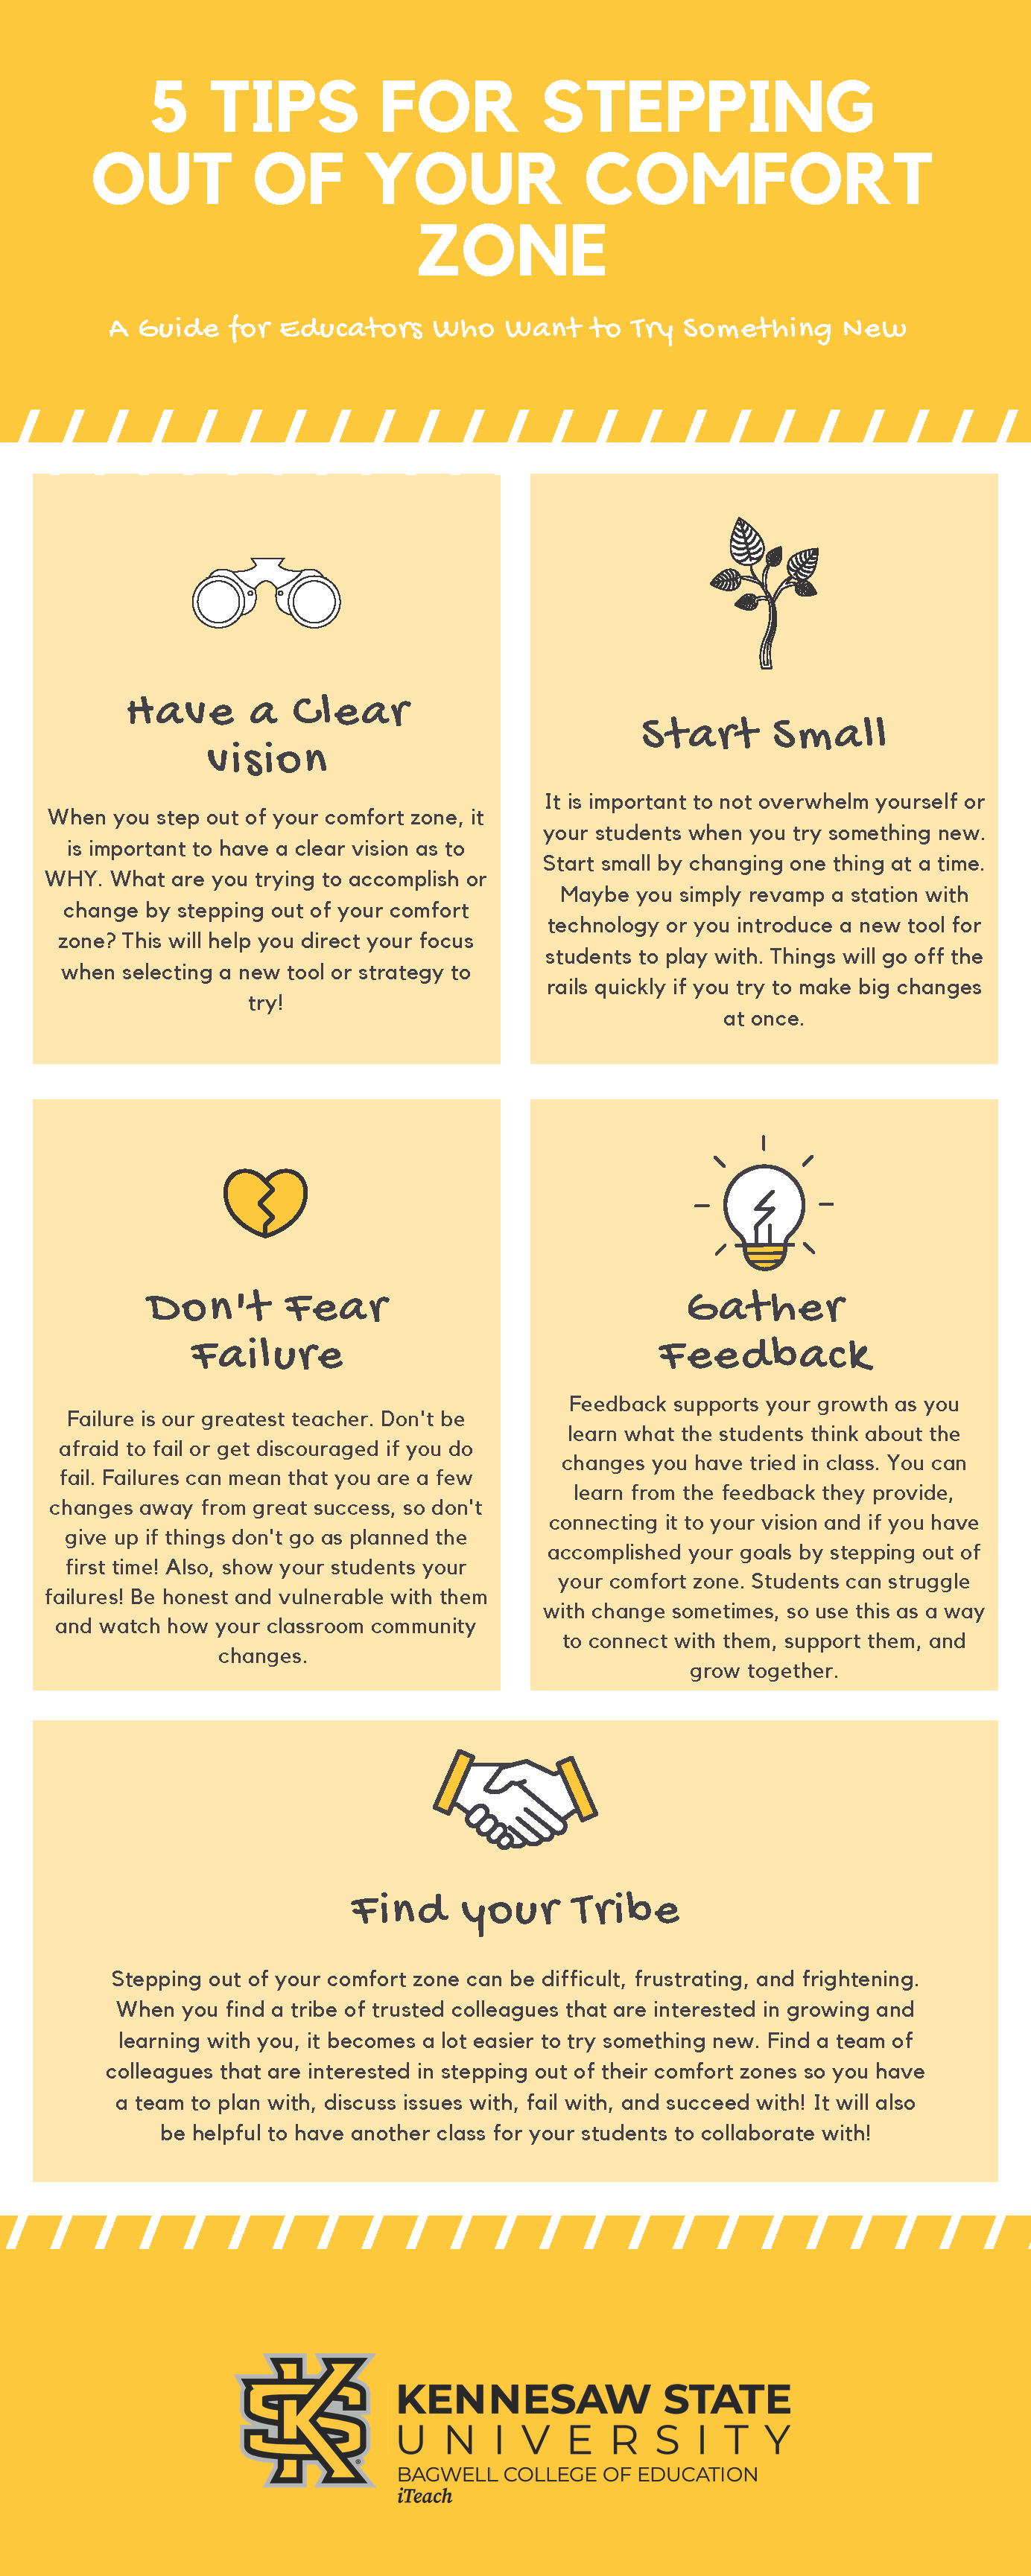 5 Ways to Step Out of Your Comfort Zone.png